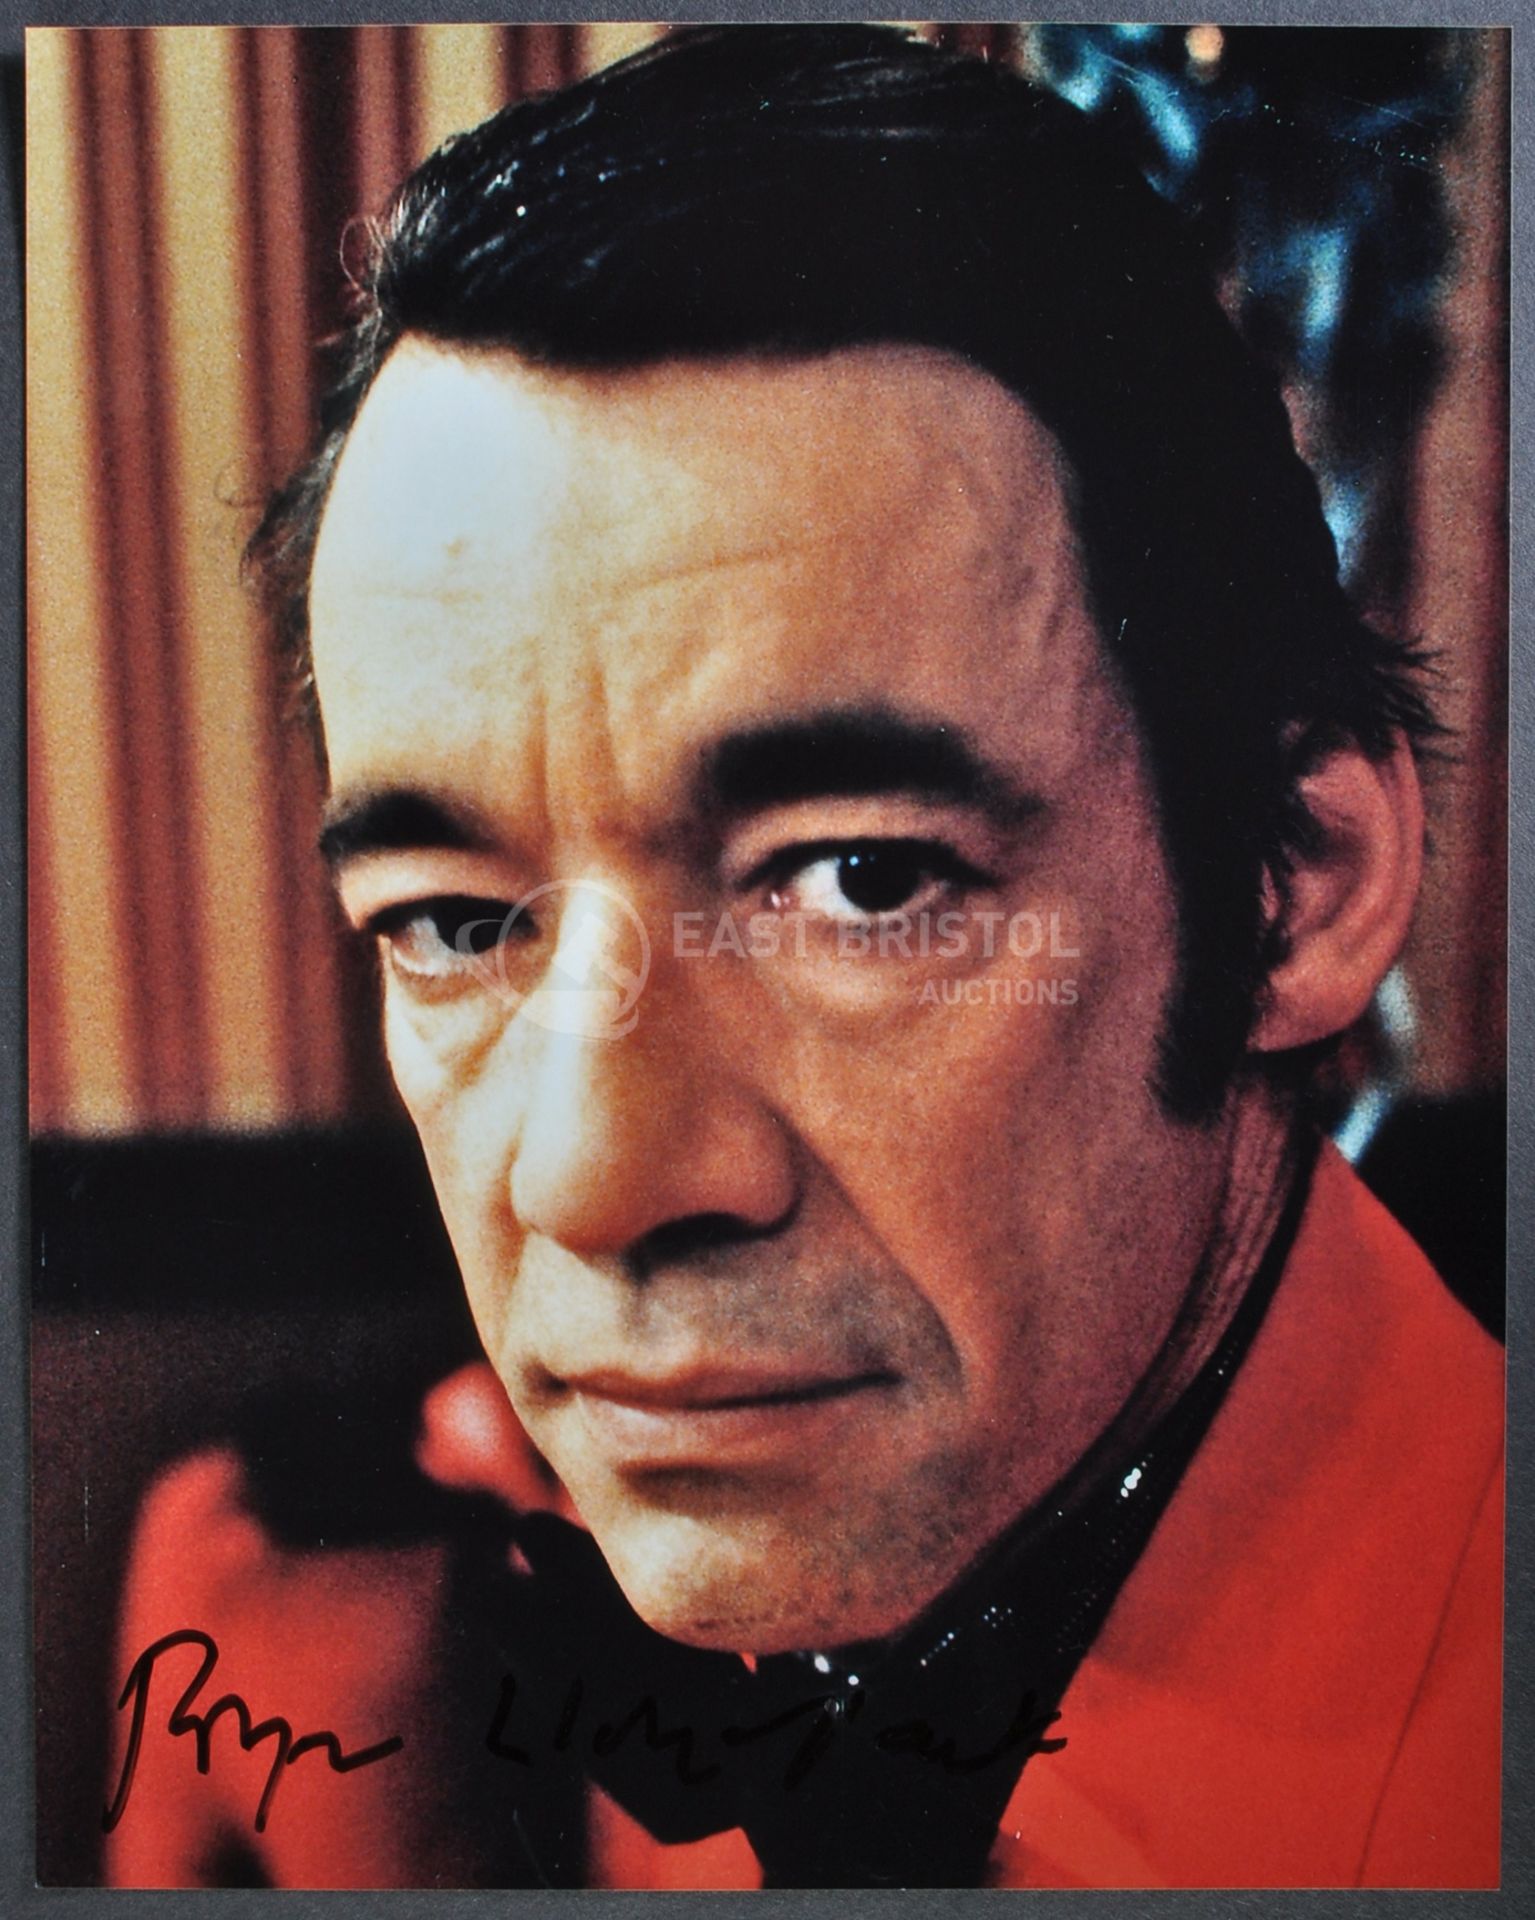 ONLY FOOLS & HORSES - TRIGGER - ROGER LLOYD PACK SIGNED 8X10" PHOTO